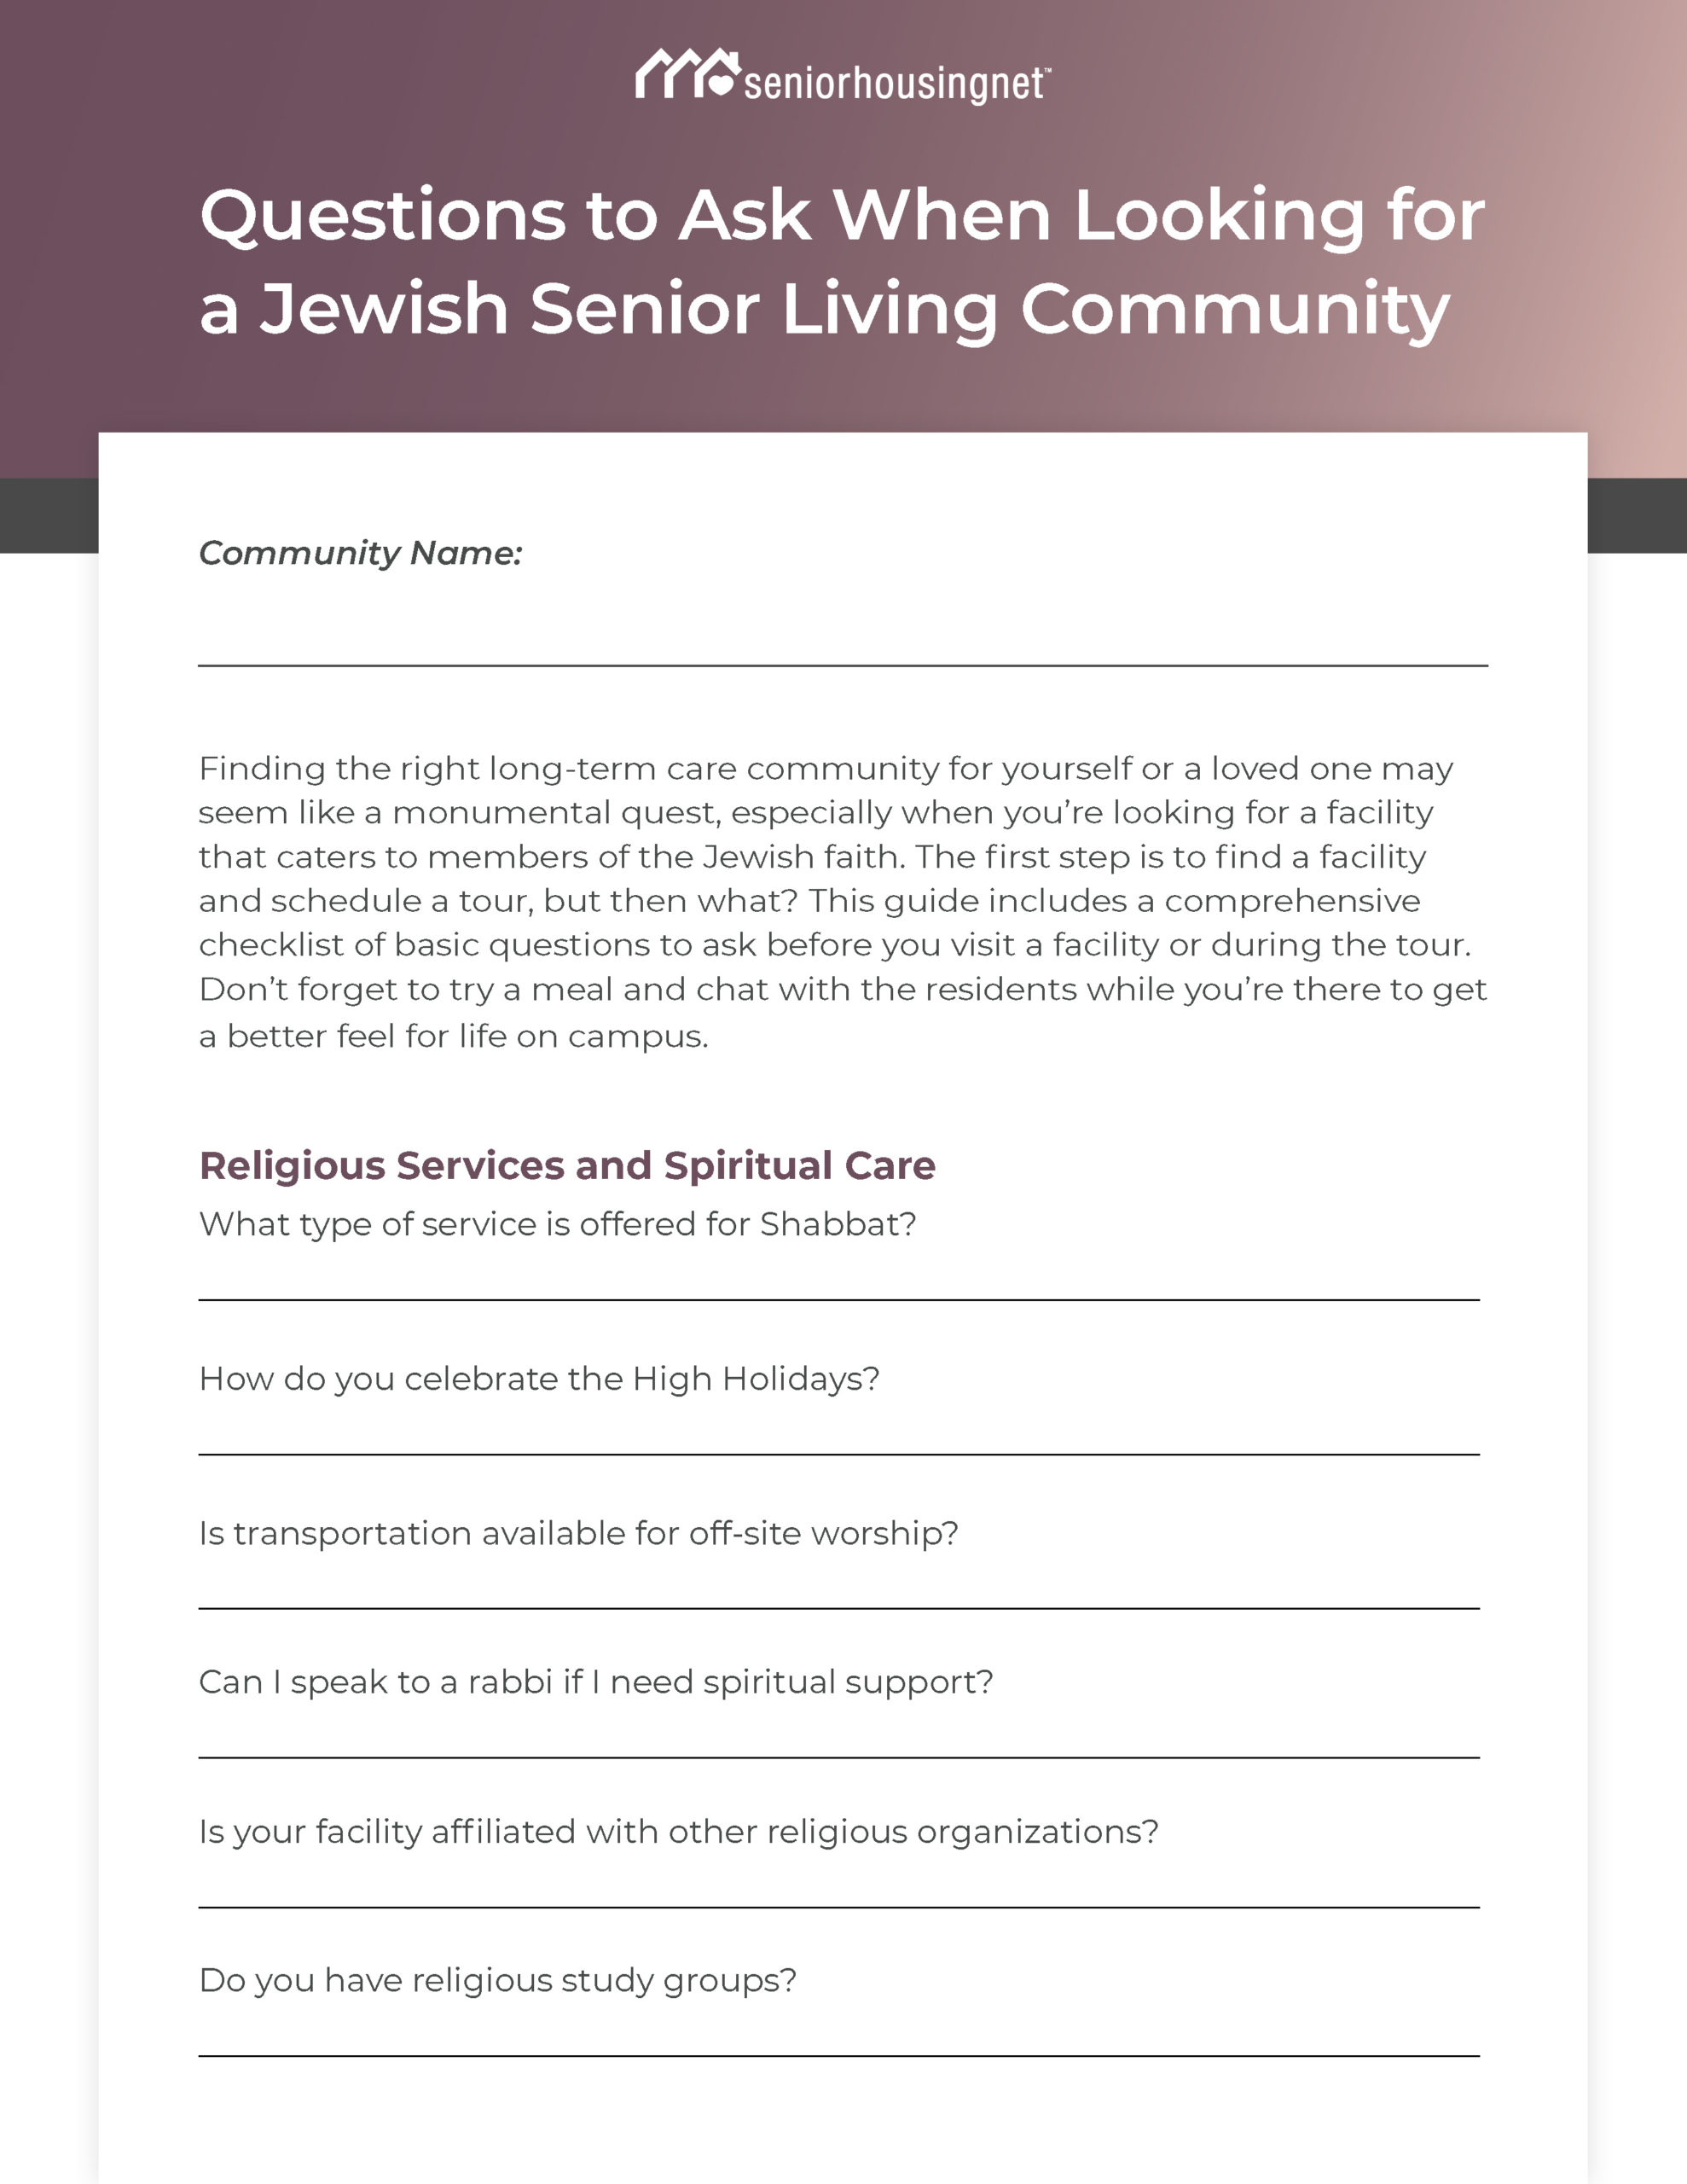 Tips for Finding a Jewish Senior Living Community 